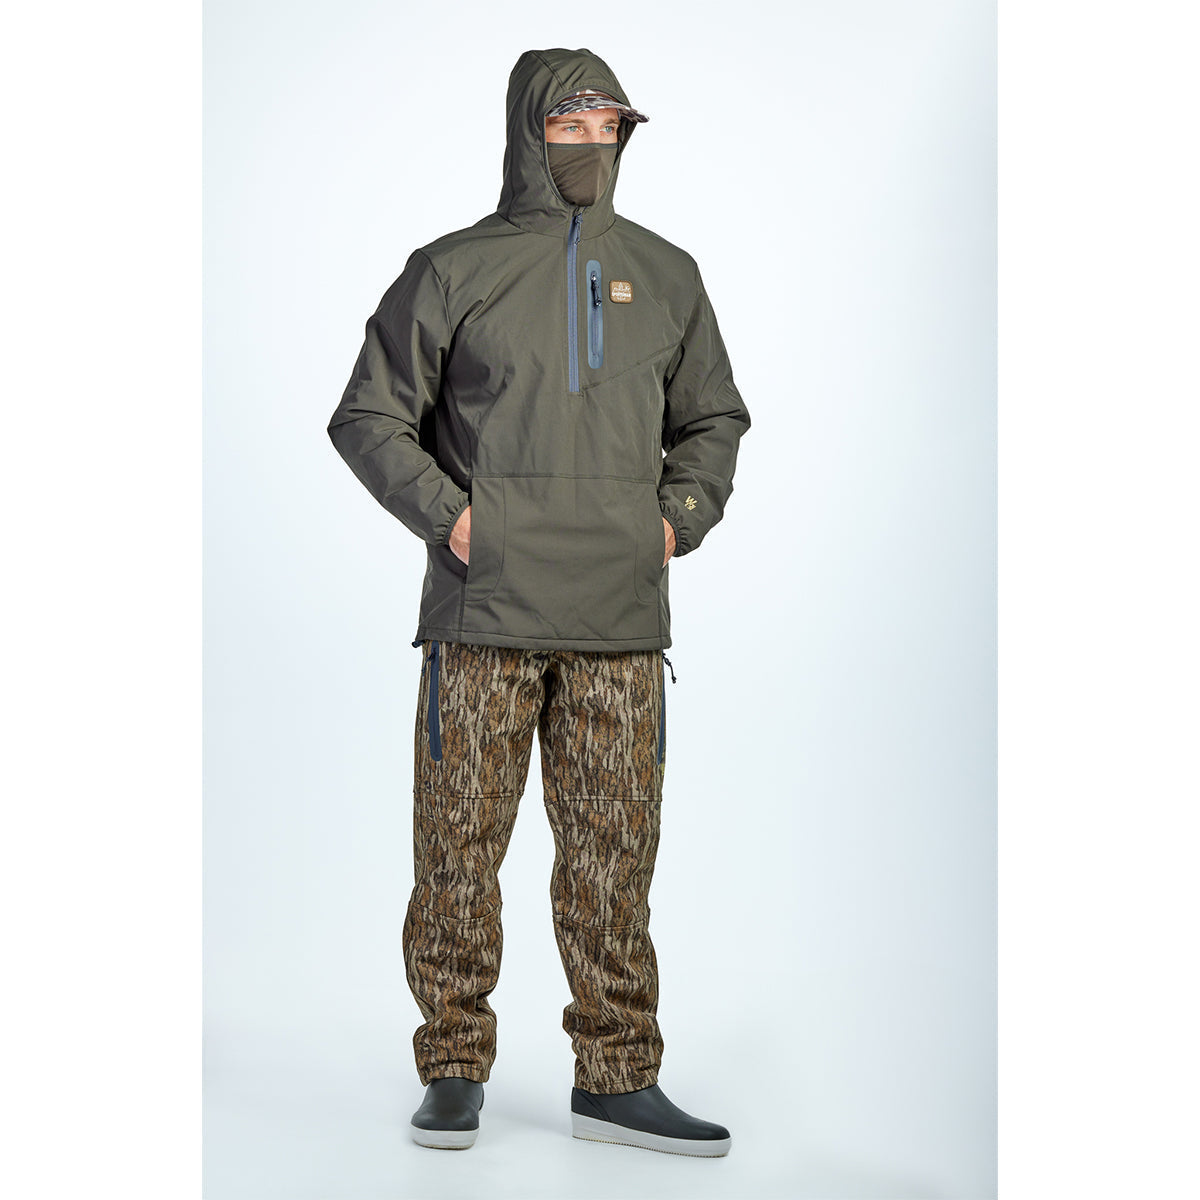 Sportsman W3i Insulated Water and Wind Resistant Hunting & Fishing Hoodie 2x / Realtree Max7